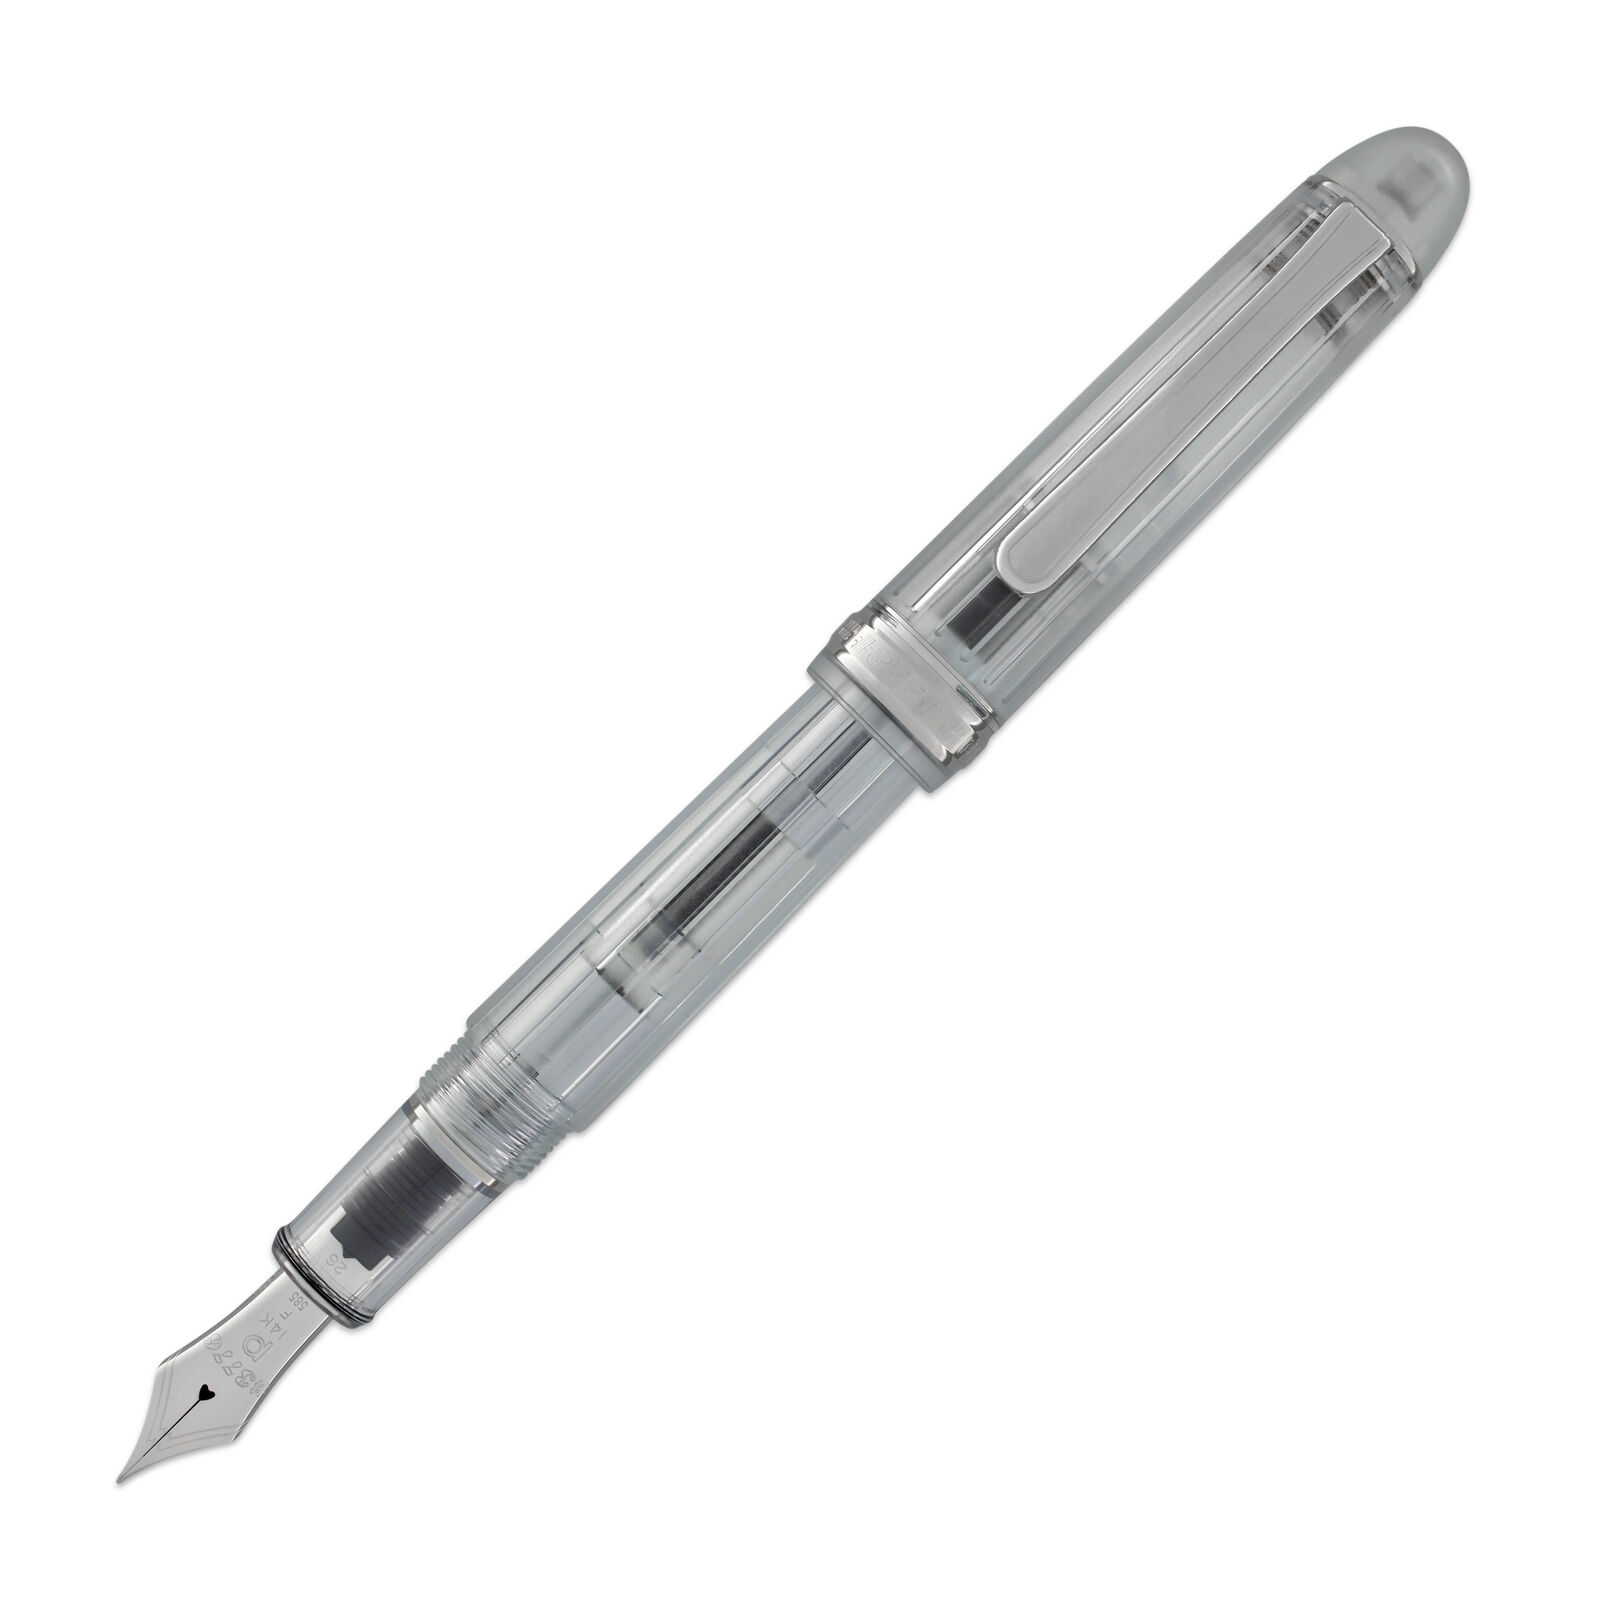 Platinum 3776 Century Nice Pur Broad Point Fountain Pen Limited Edition